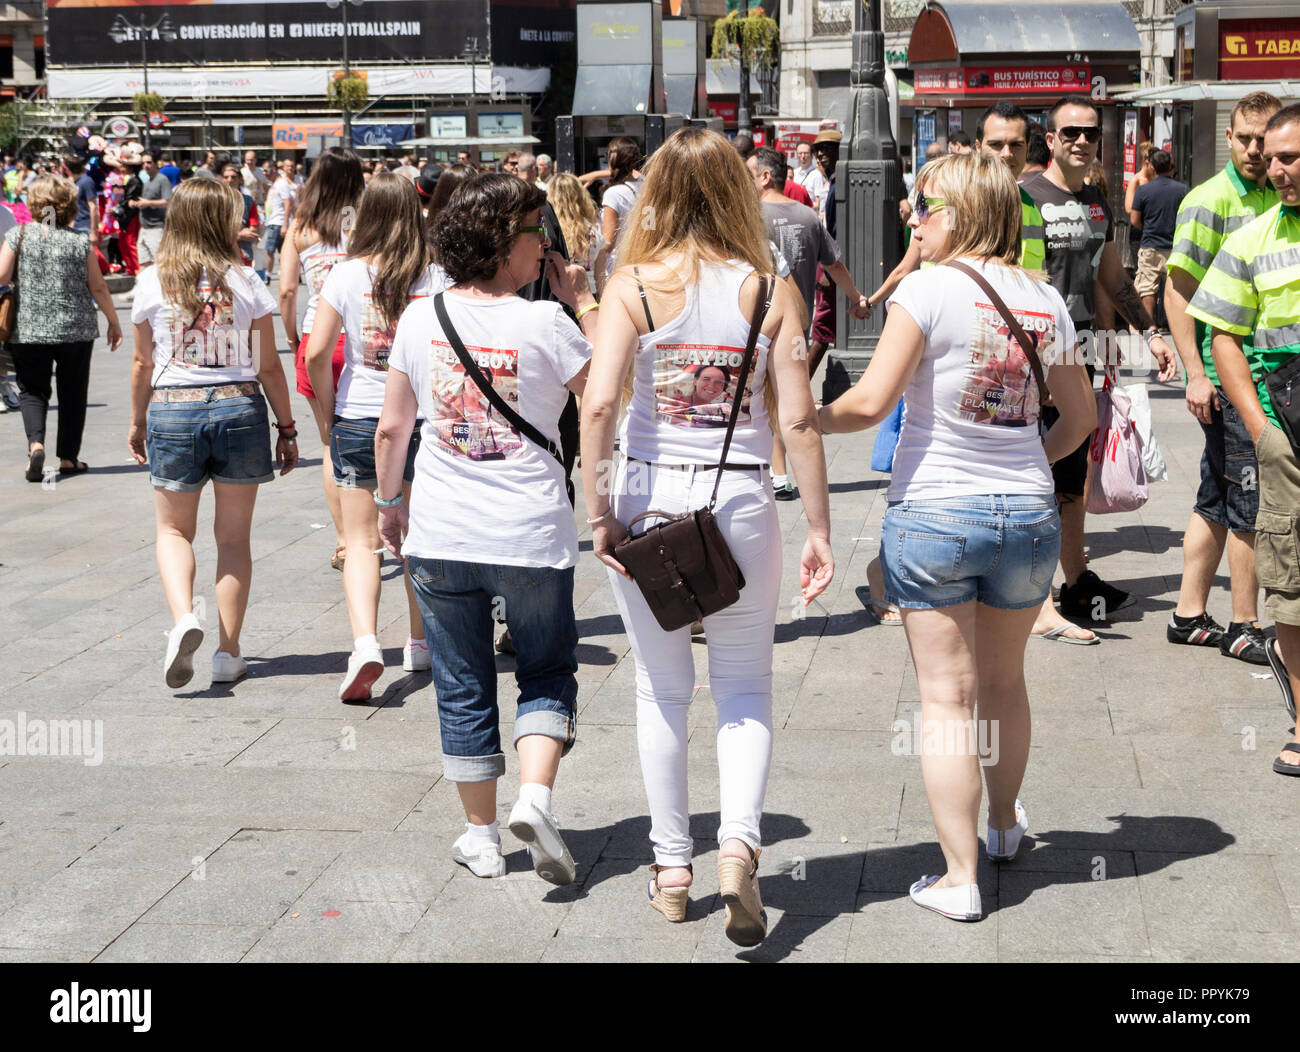 Workmen staring at women on Hen party in Madrid. Women wearing Playboy shirts. Madrid Spain Stock Photo